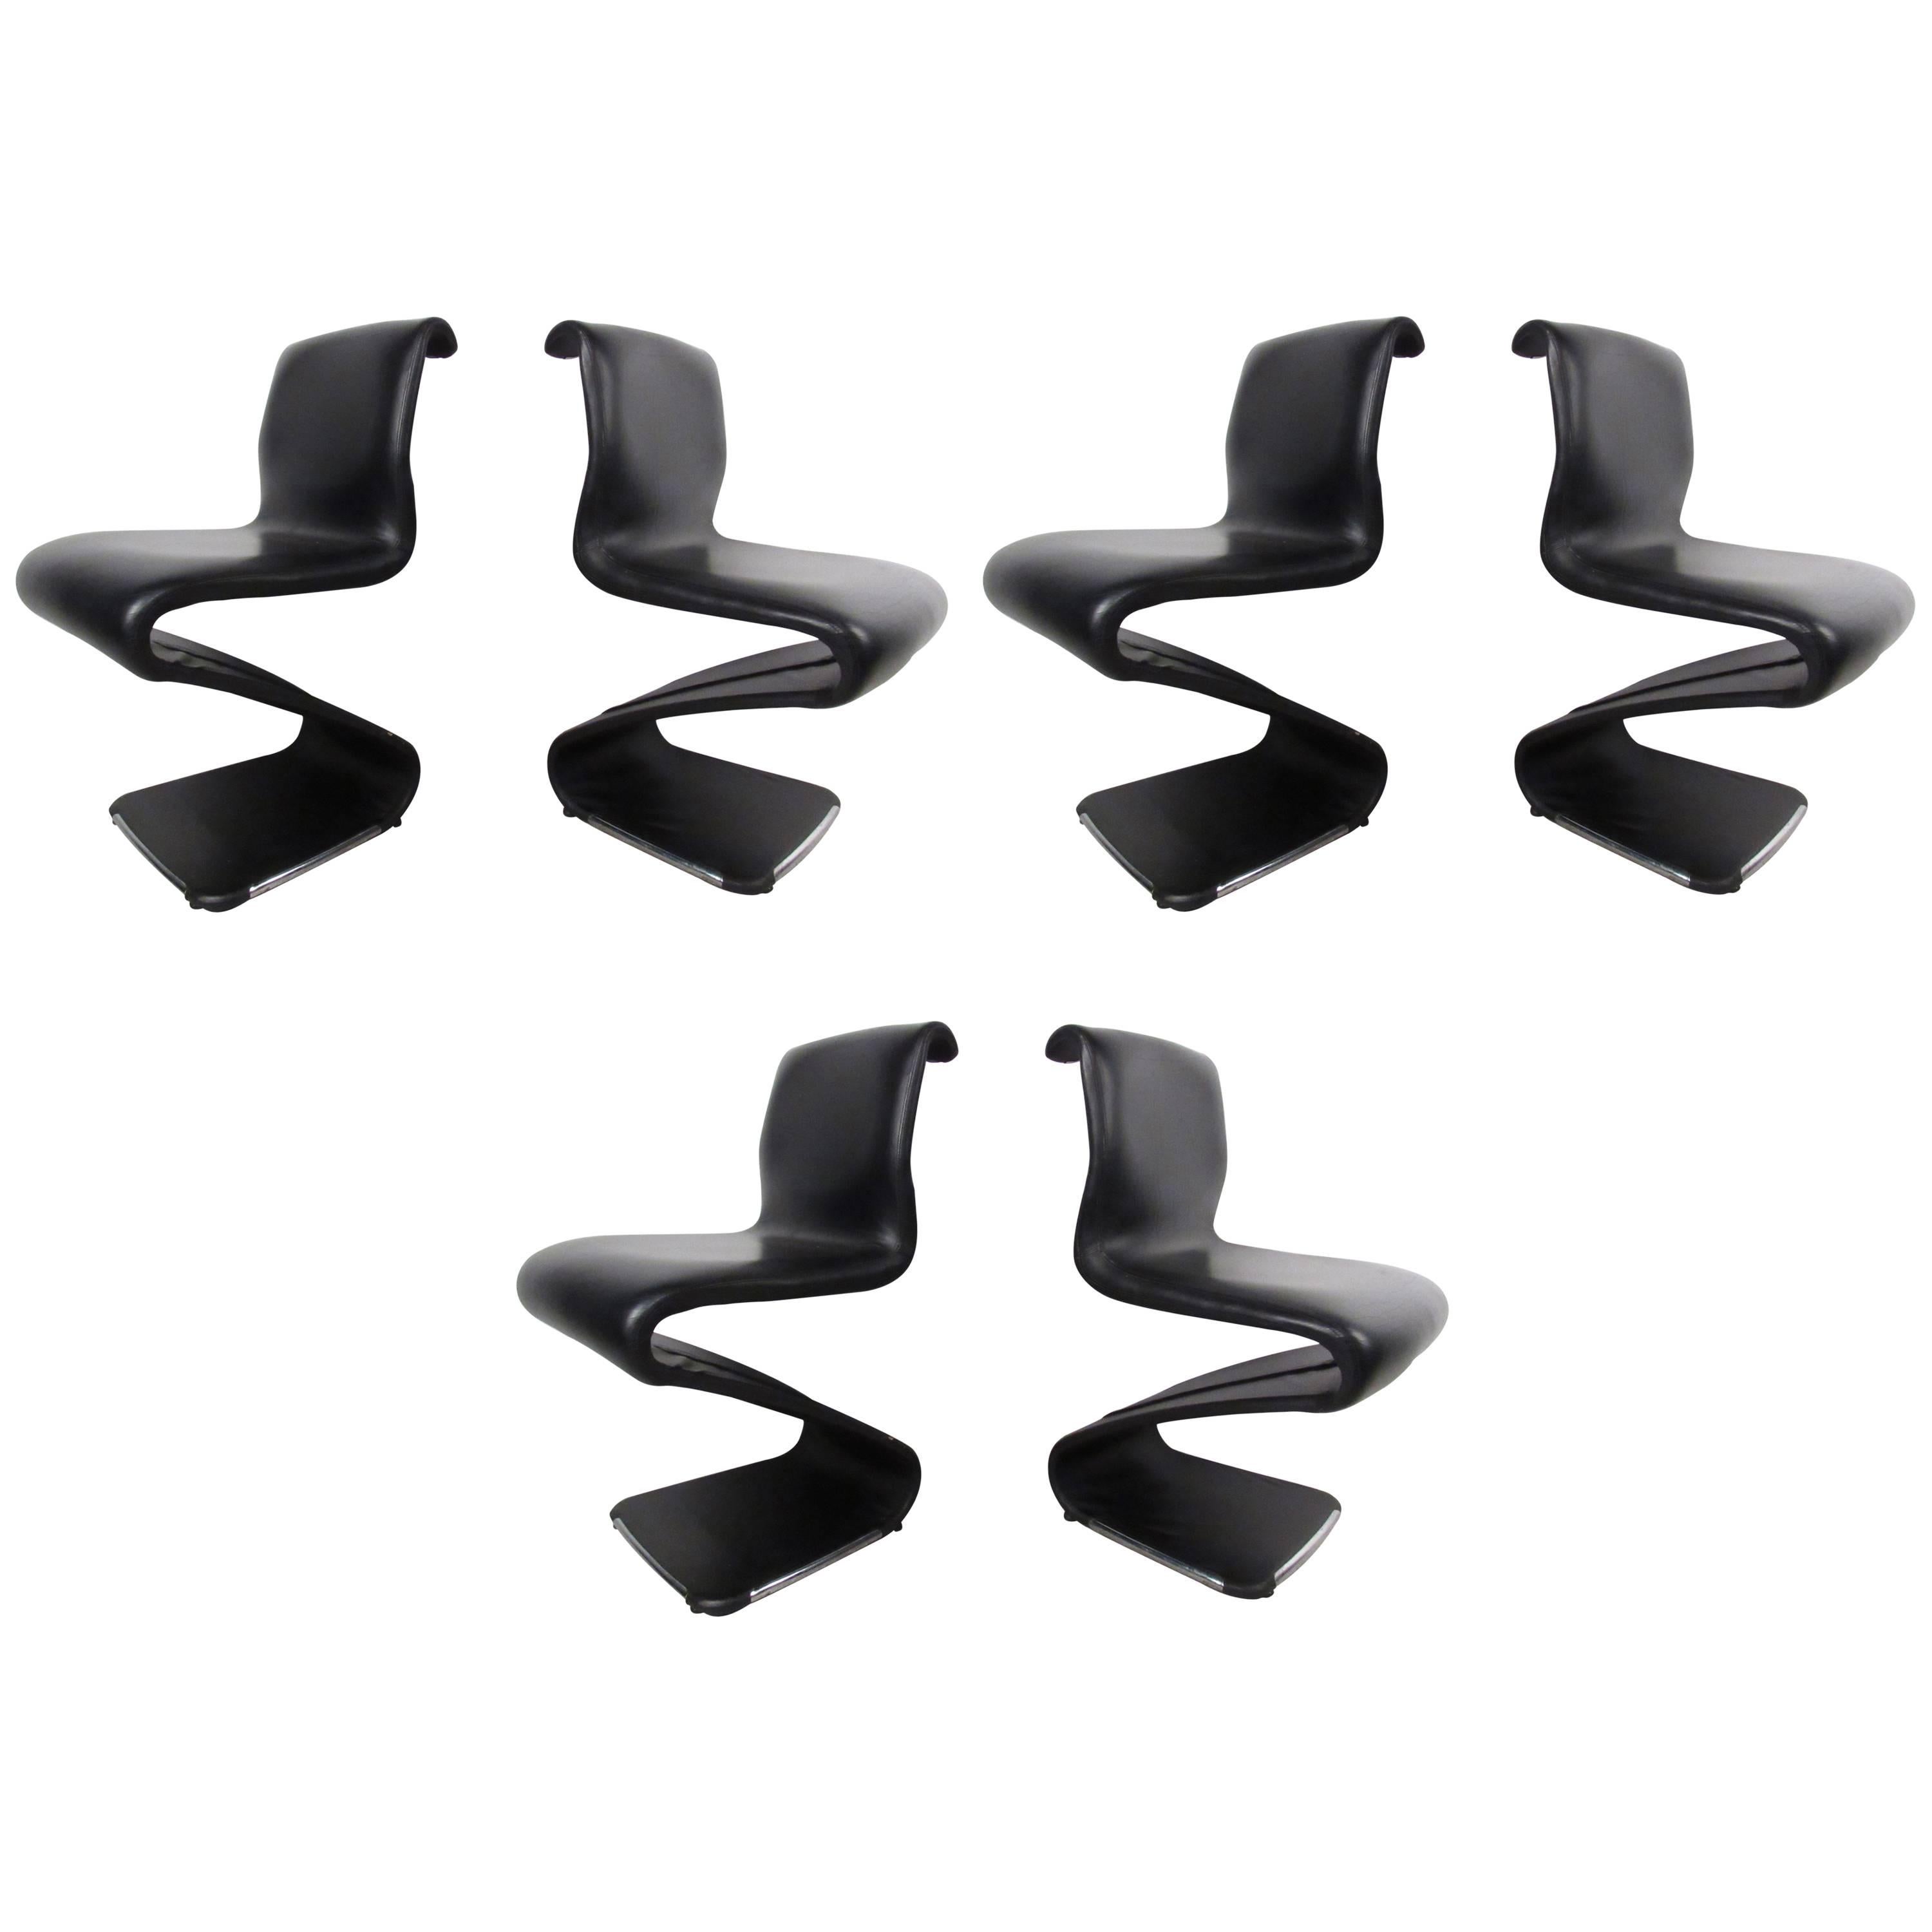 RIMA Dining Room Chairs